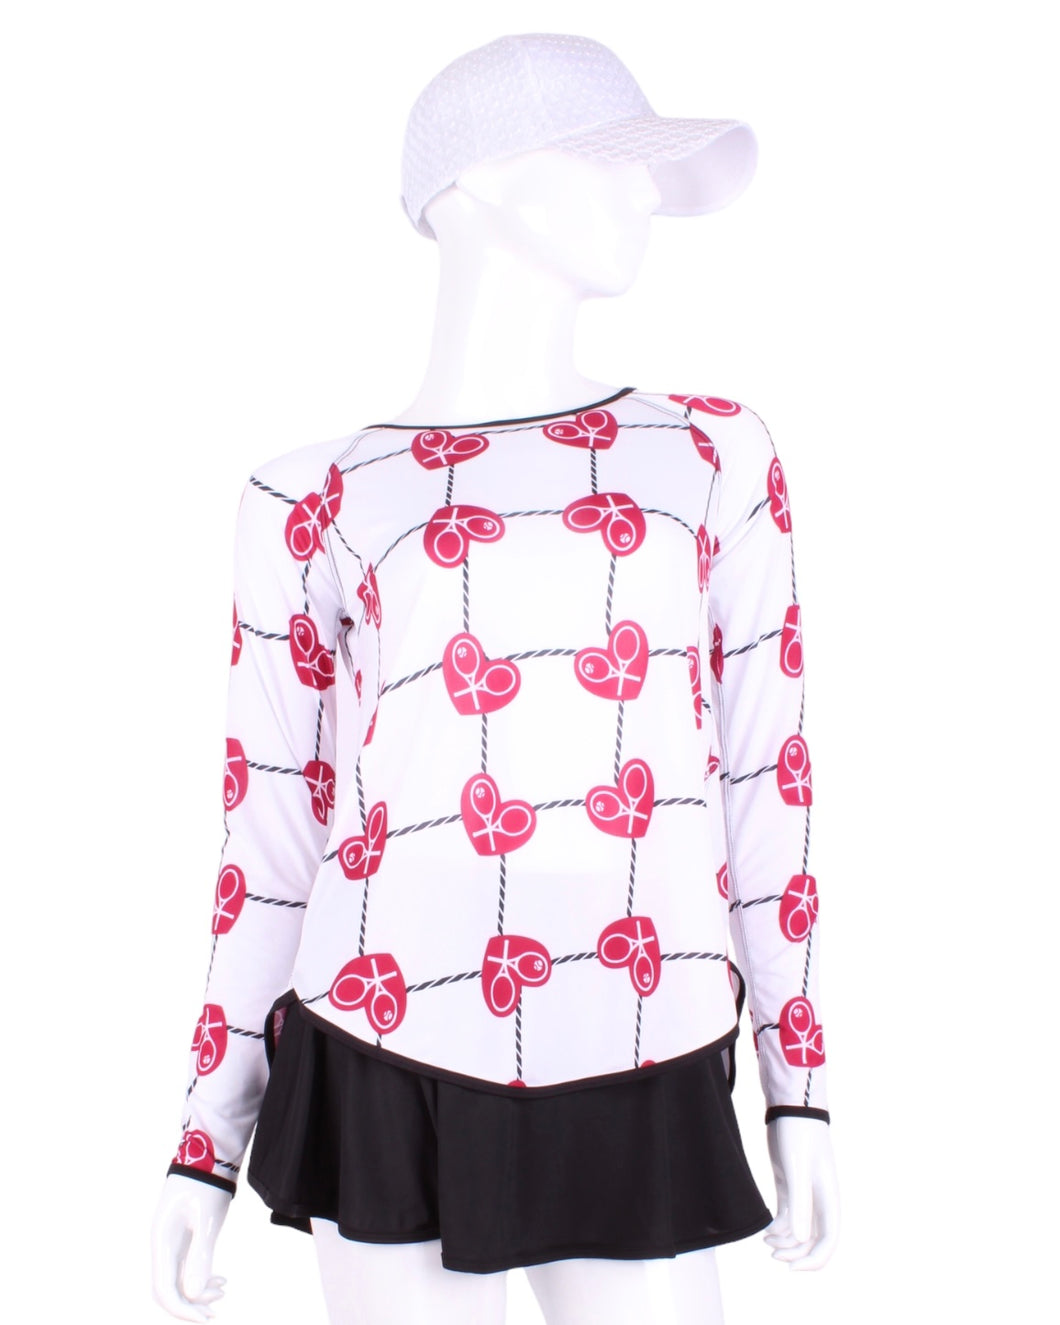 This is our limited edition Tie Back Long Sleeve Top Raspberry Red Hearts & Net.  This piece has a silky and soft fabric. - by design.  Unique.  Luxurious.  Comfortable.  Cool.  Fun.